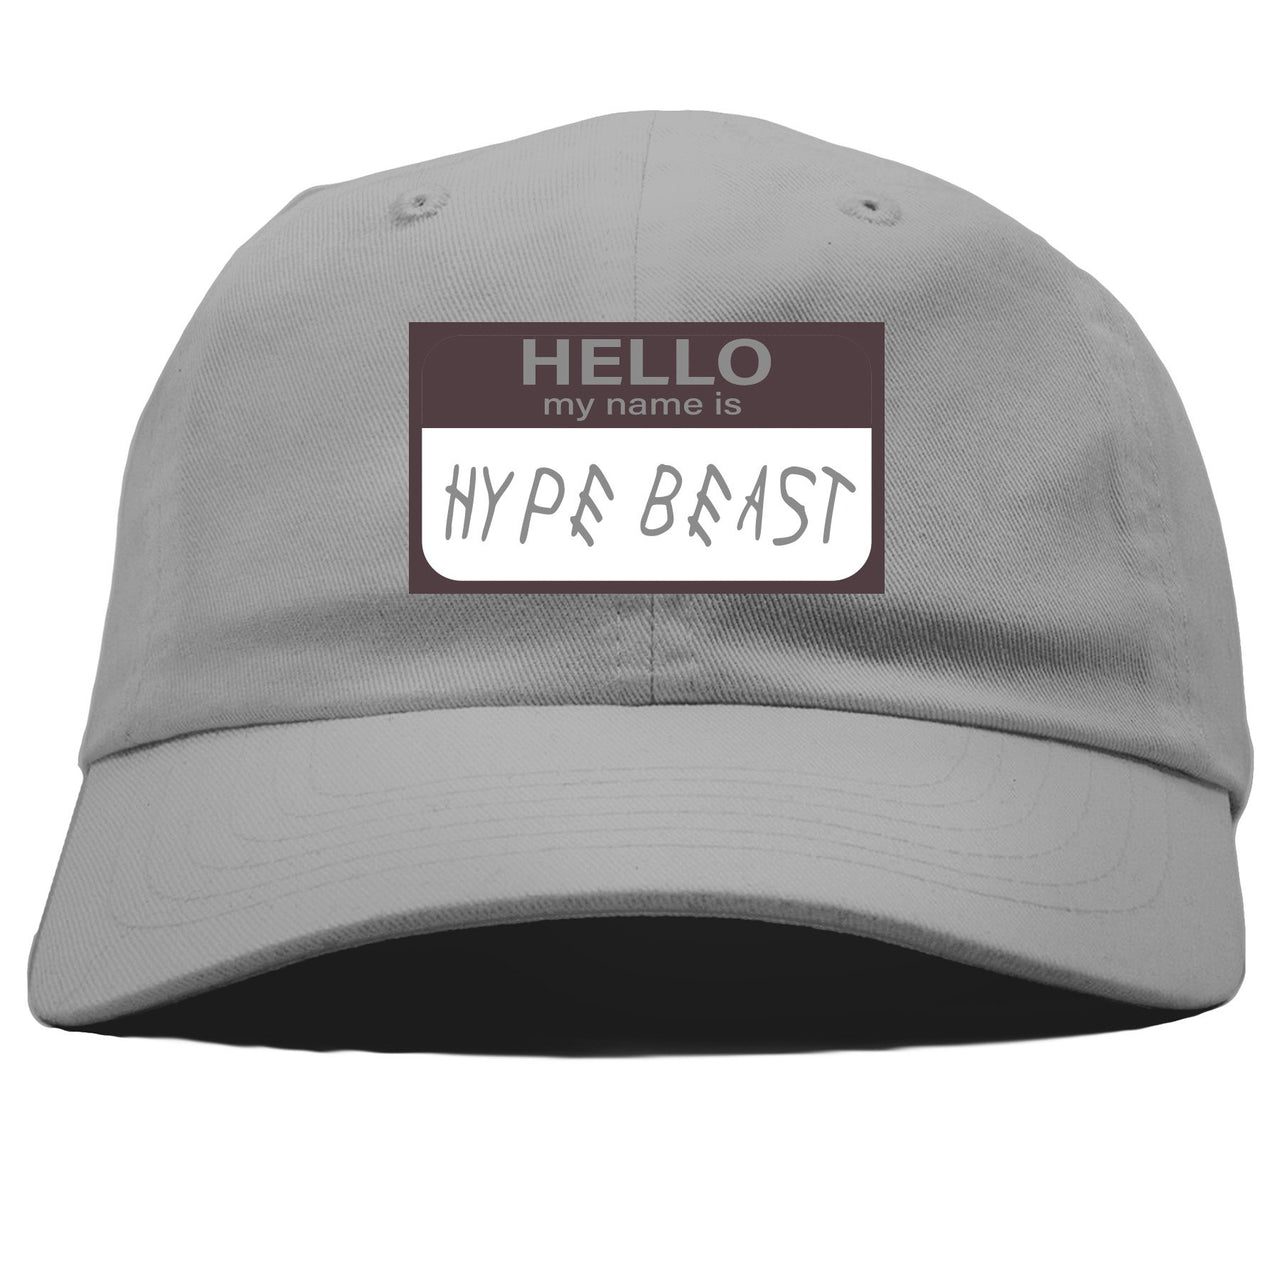 Geode 700s Dad Hat | Hello My Name Is Hype Beast Woe, Light Gray